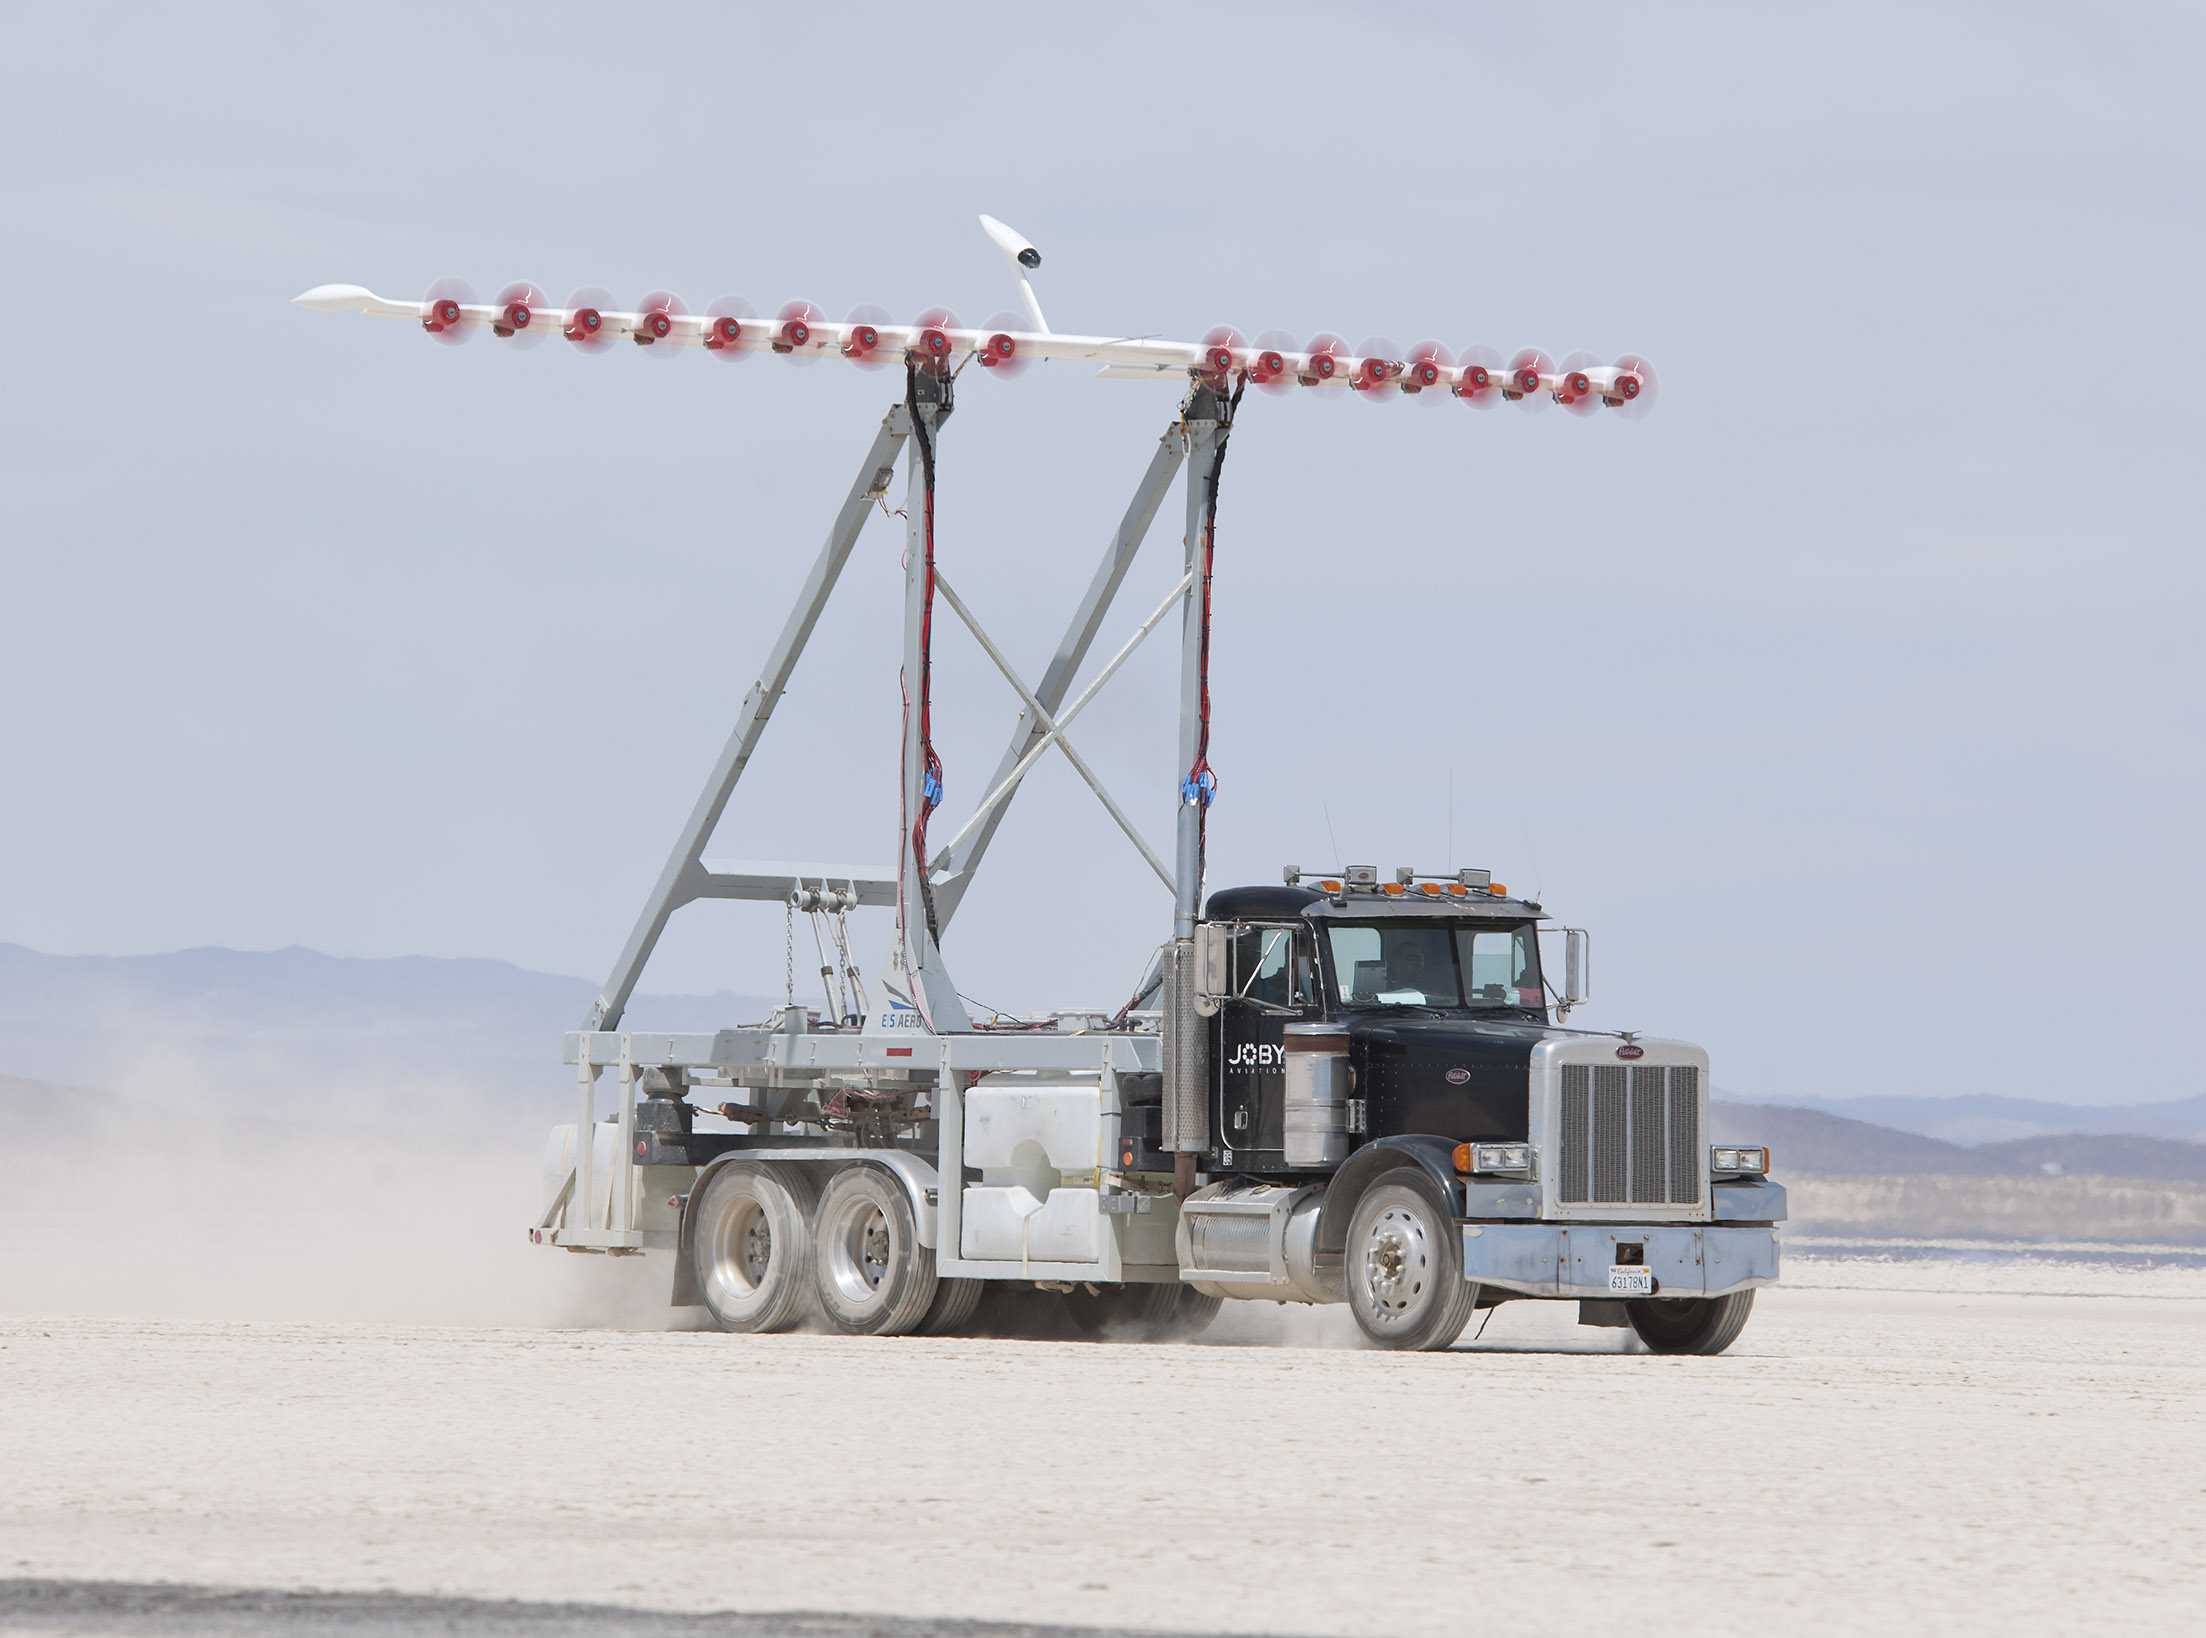 The Hybrid-Electric Integrated Systems Testbed performs a full power ground test.